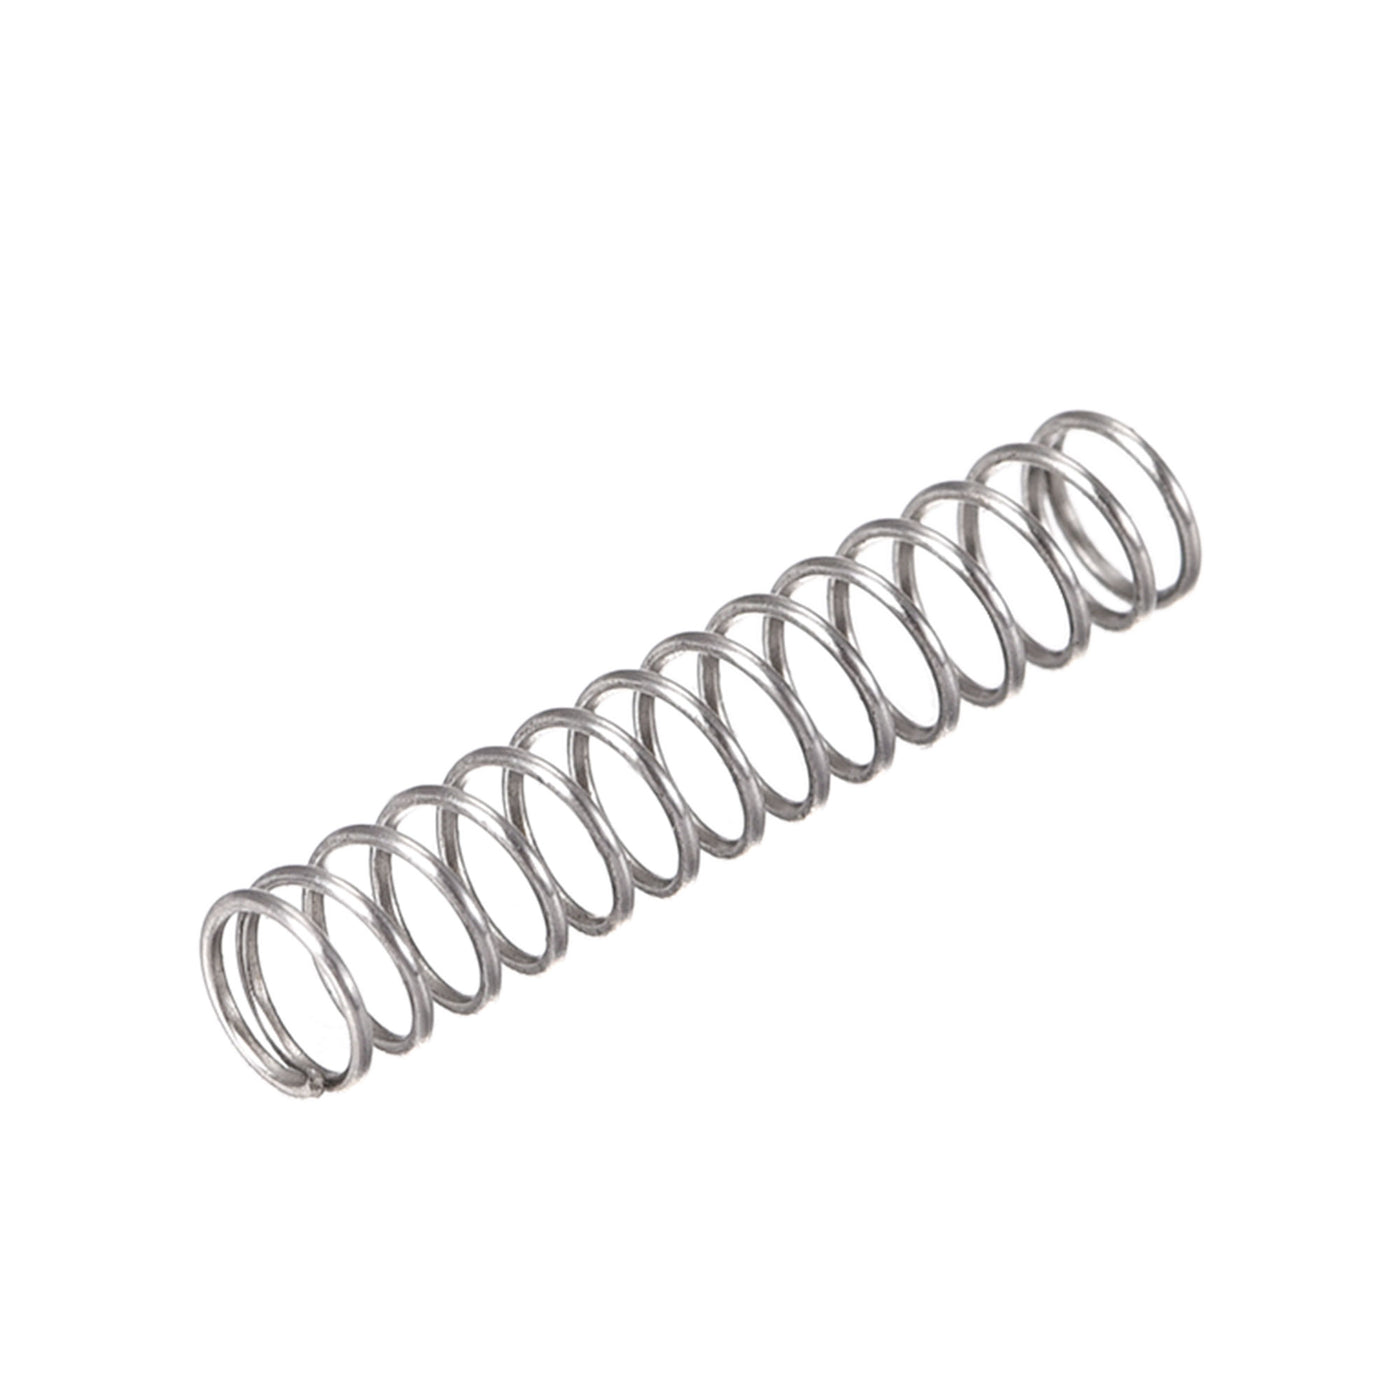 uxcell Uxcell Compressed Spring,4mmx0.4mmx20mm Free Length,7.1N Load Capacity,Gray,10pcs